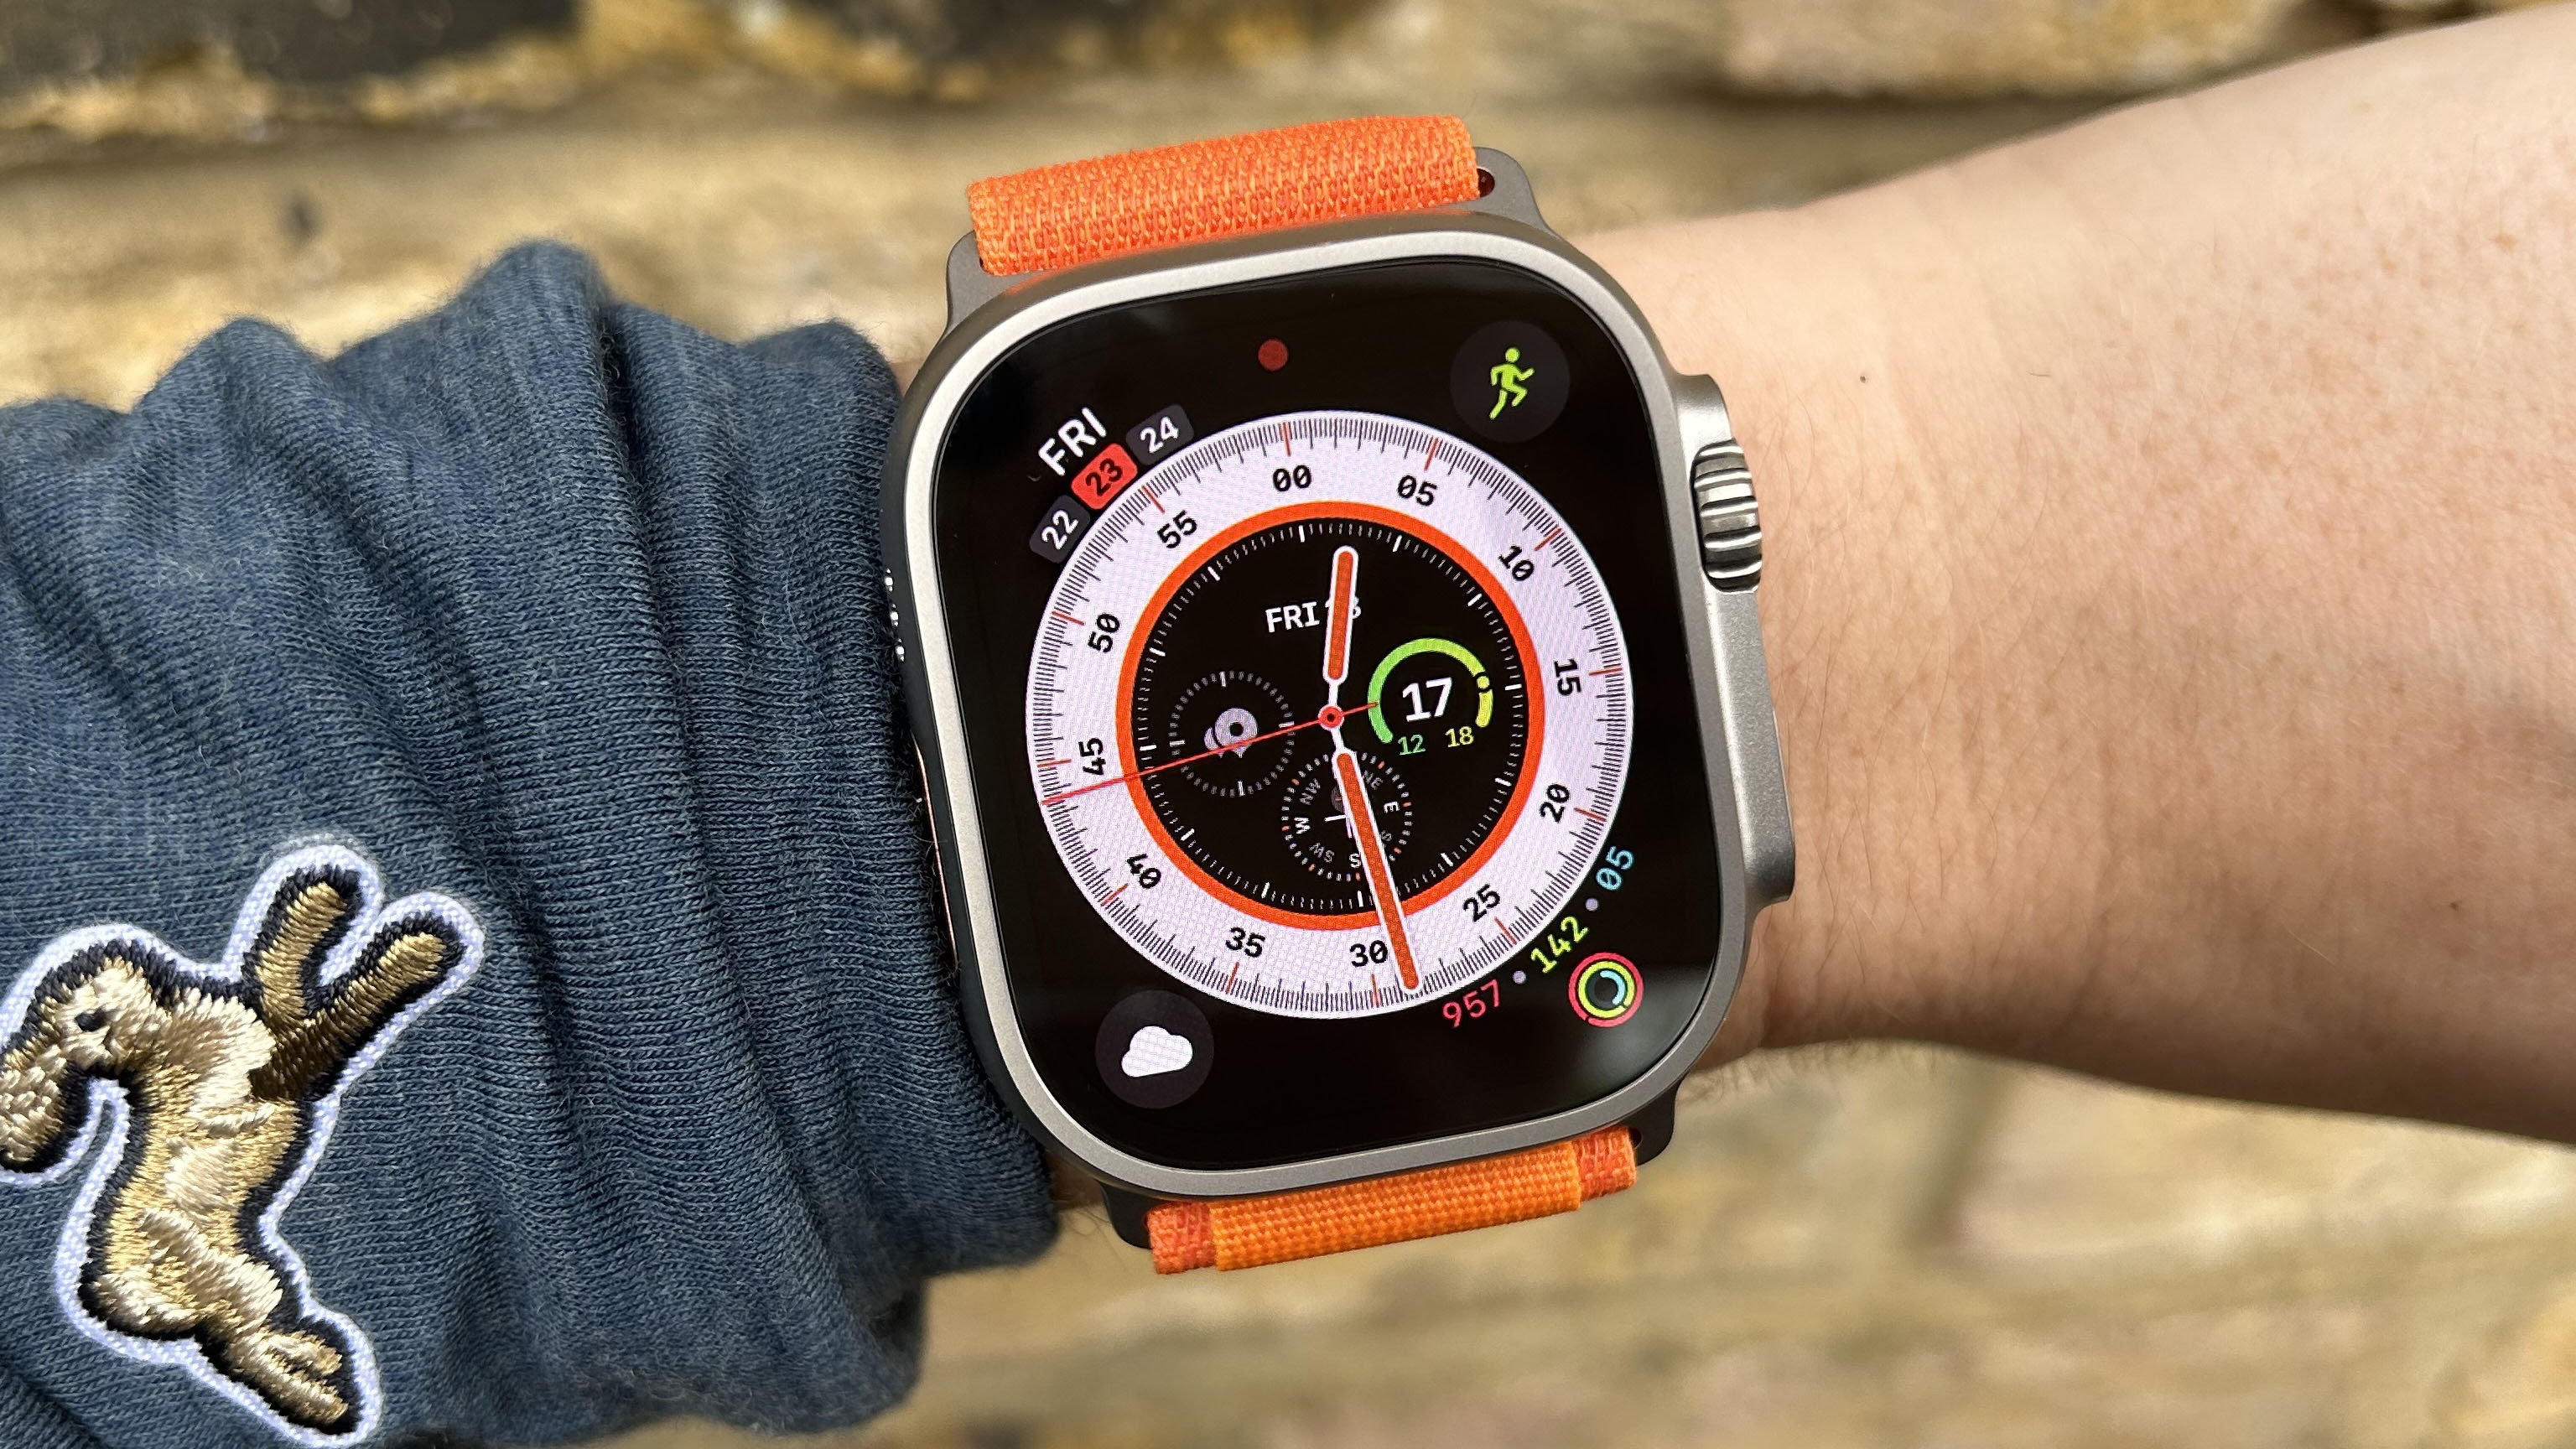 A Week On The Wrist: The Apple Watch Series 5 Edition In Titanium